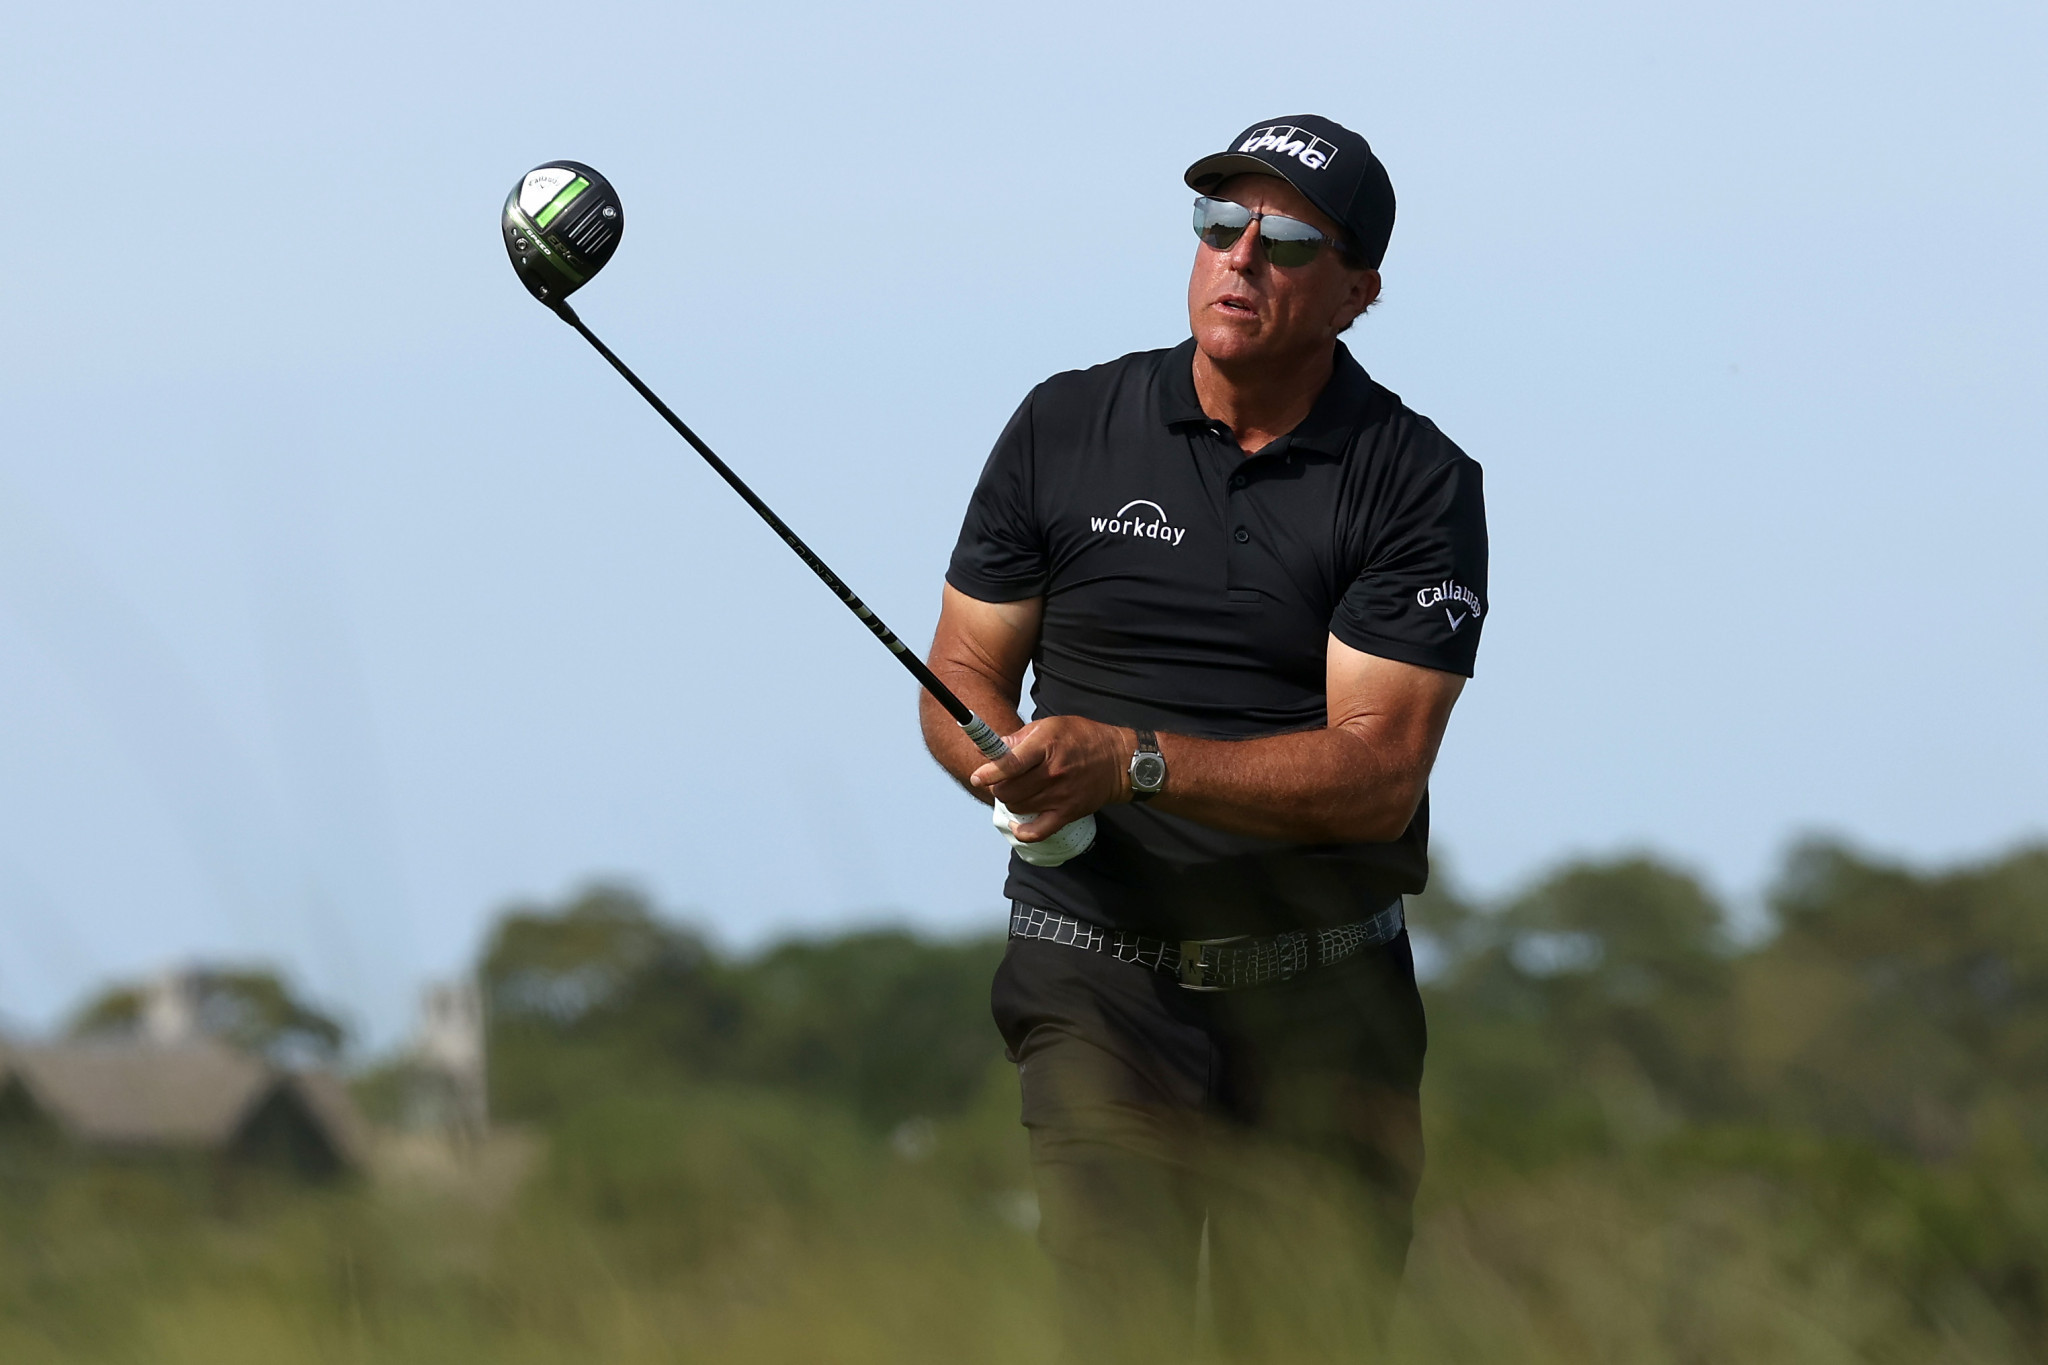 Mickelson leads Koepka by one shot heading into PGA Championship final round